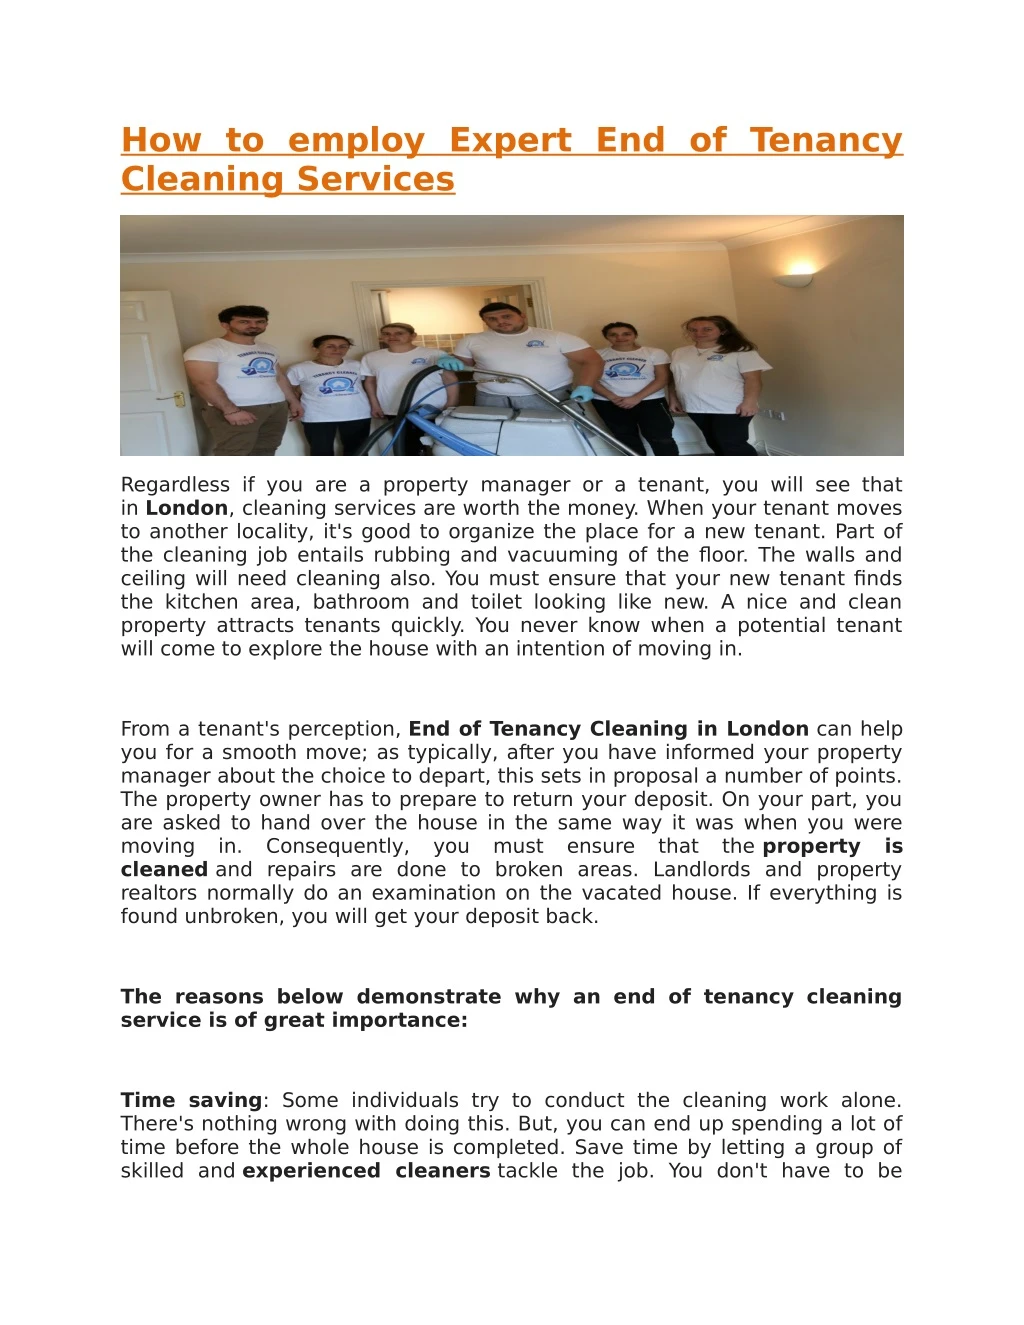 how to employ expert end of tenancy cleaning